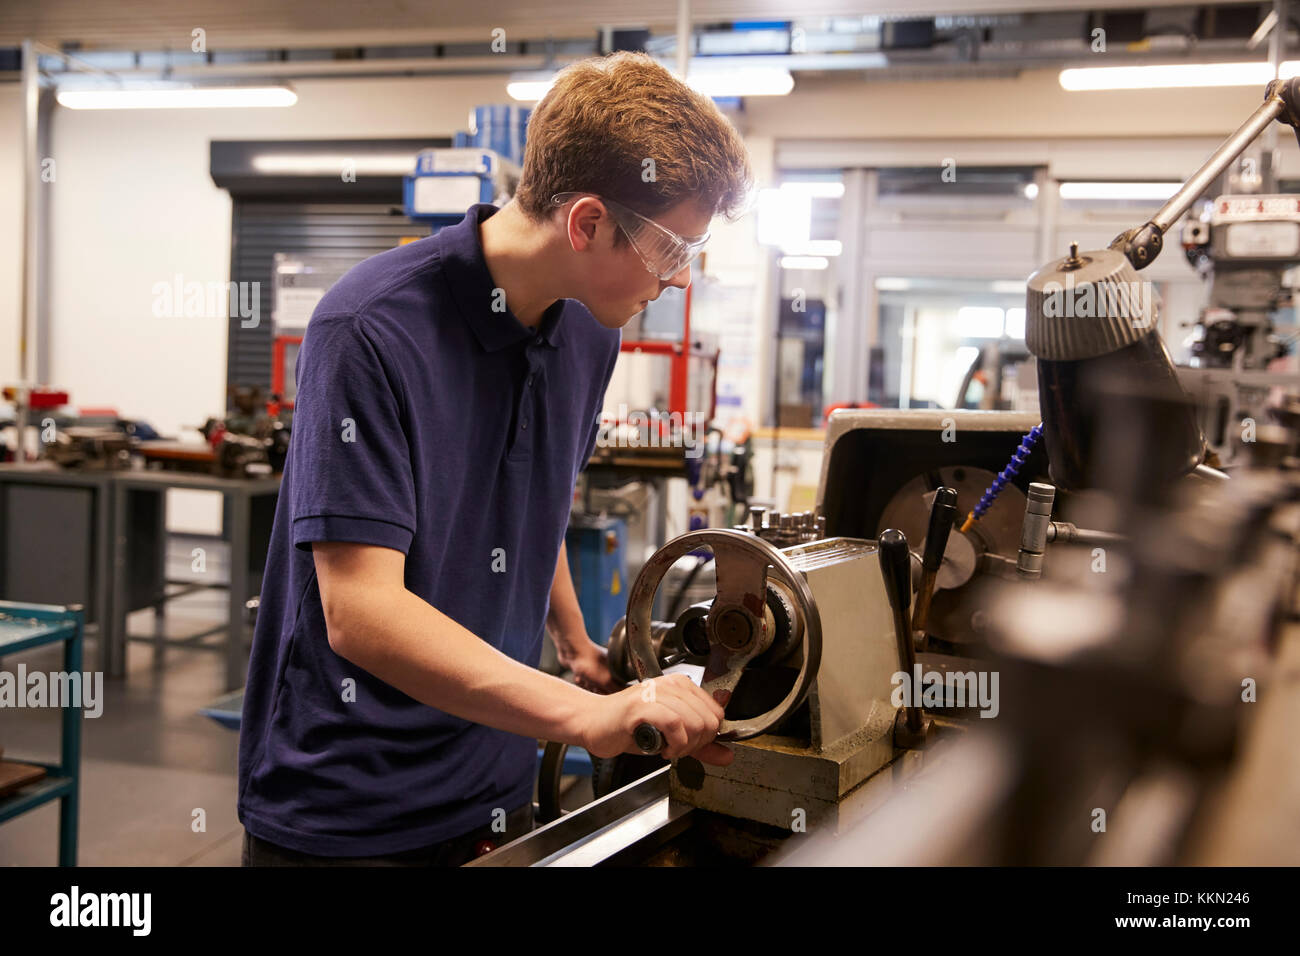 Male Teenage Apprentice In Engineering Factory Using Lathe Stock Photo